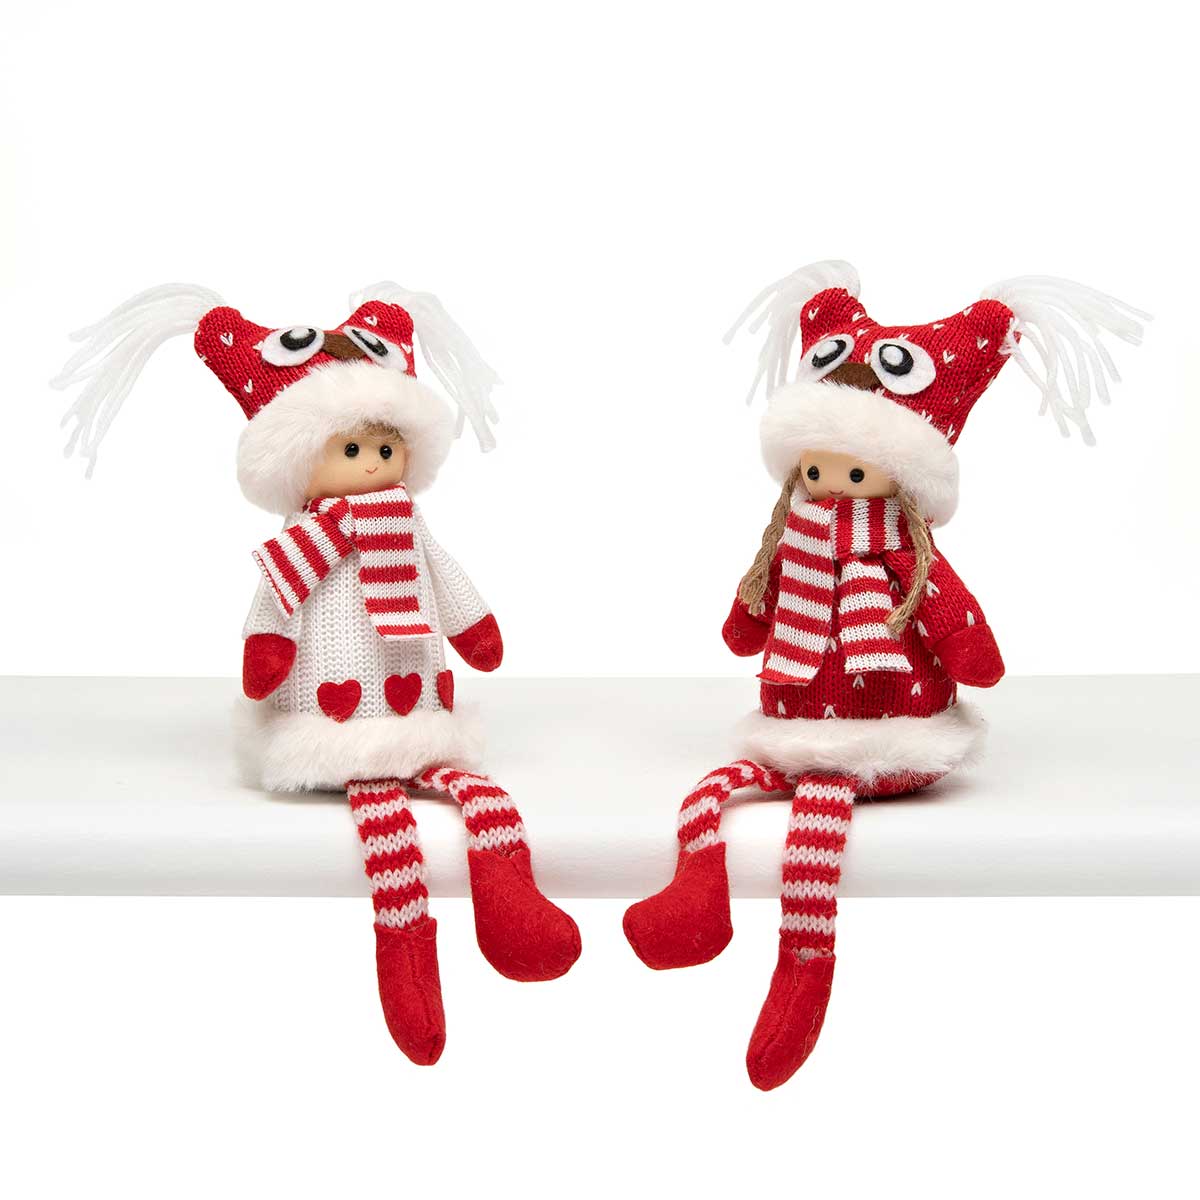 KID OWL HAT WITH LEGS 2 ASSORTED 3.5IN X 2.75IN X 9IN RED/WHITE - Click Image to Close